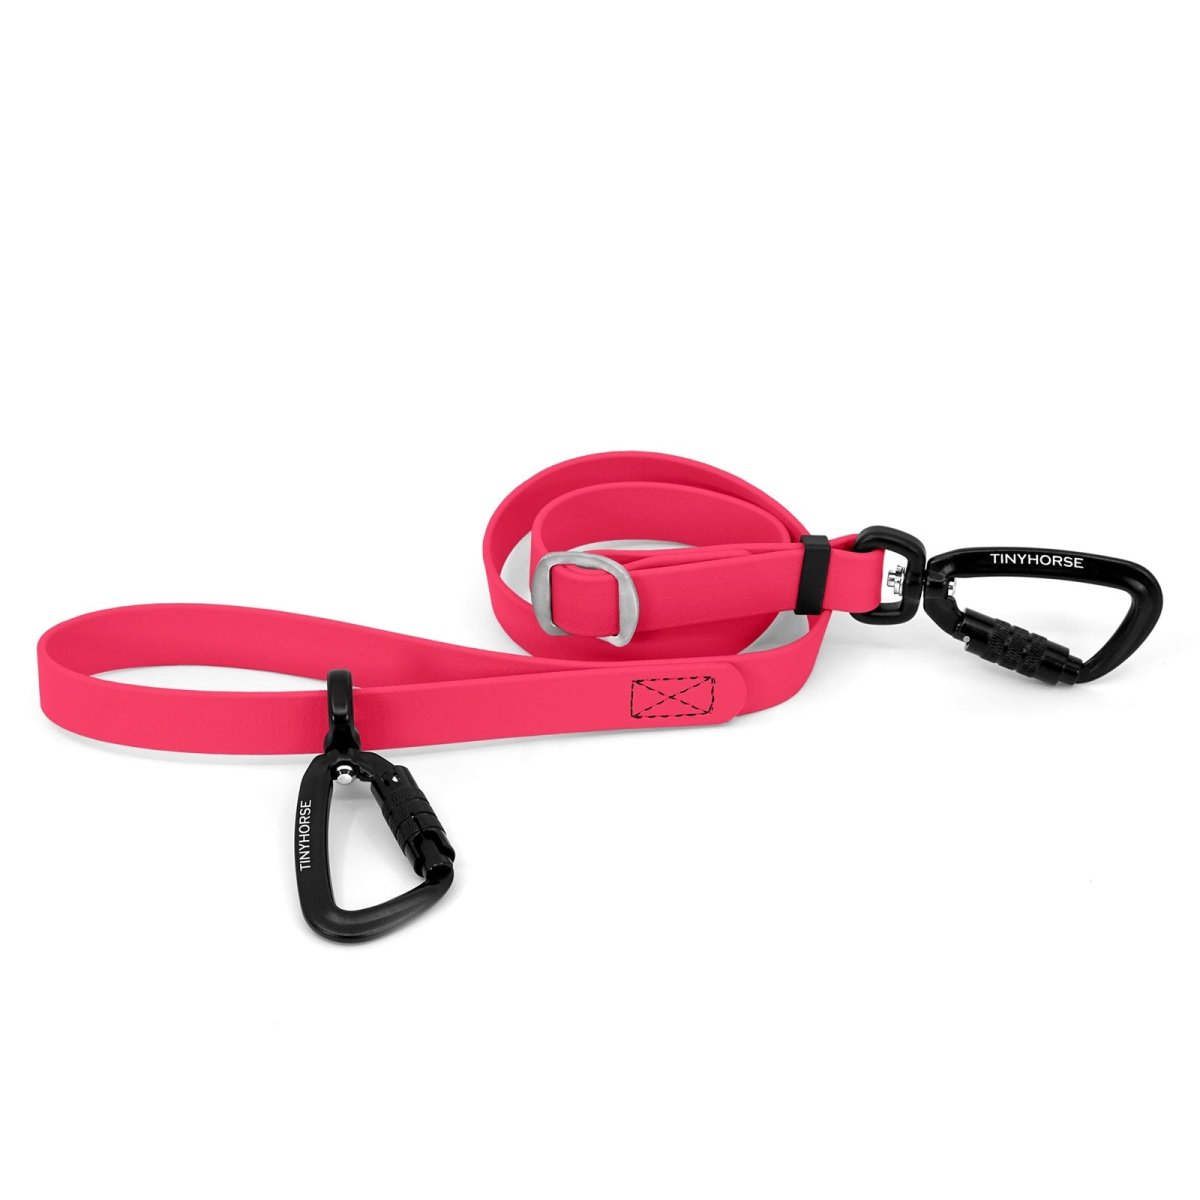 An adjustable neon pink-coloured Lead-All Pro made of BioThane with 2 auto-locking carabiners